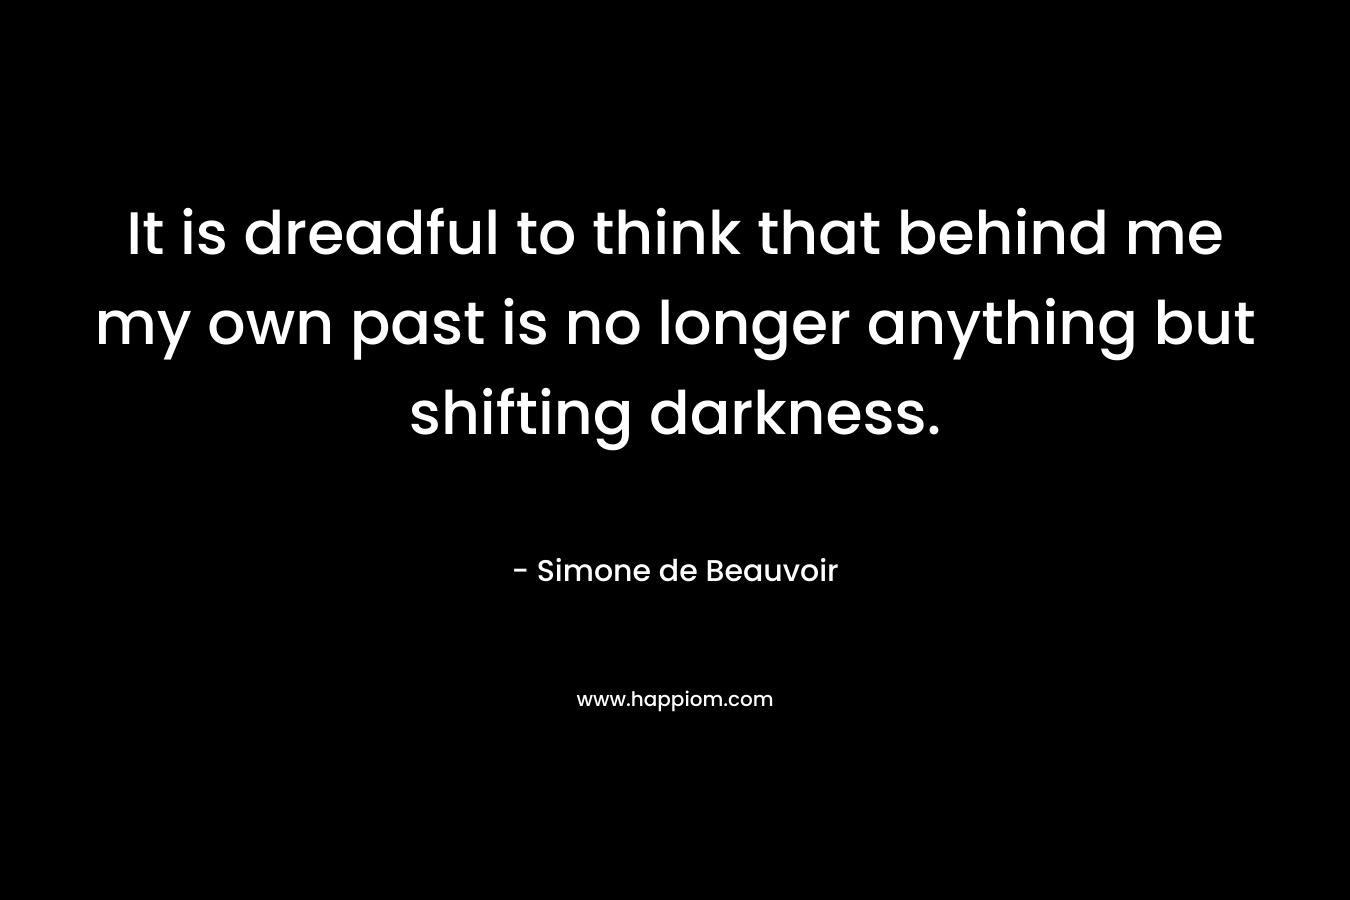 It is dreadful to think that behind me my own past is no longer anything but shifting darkness.